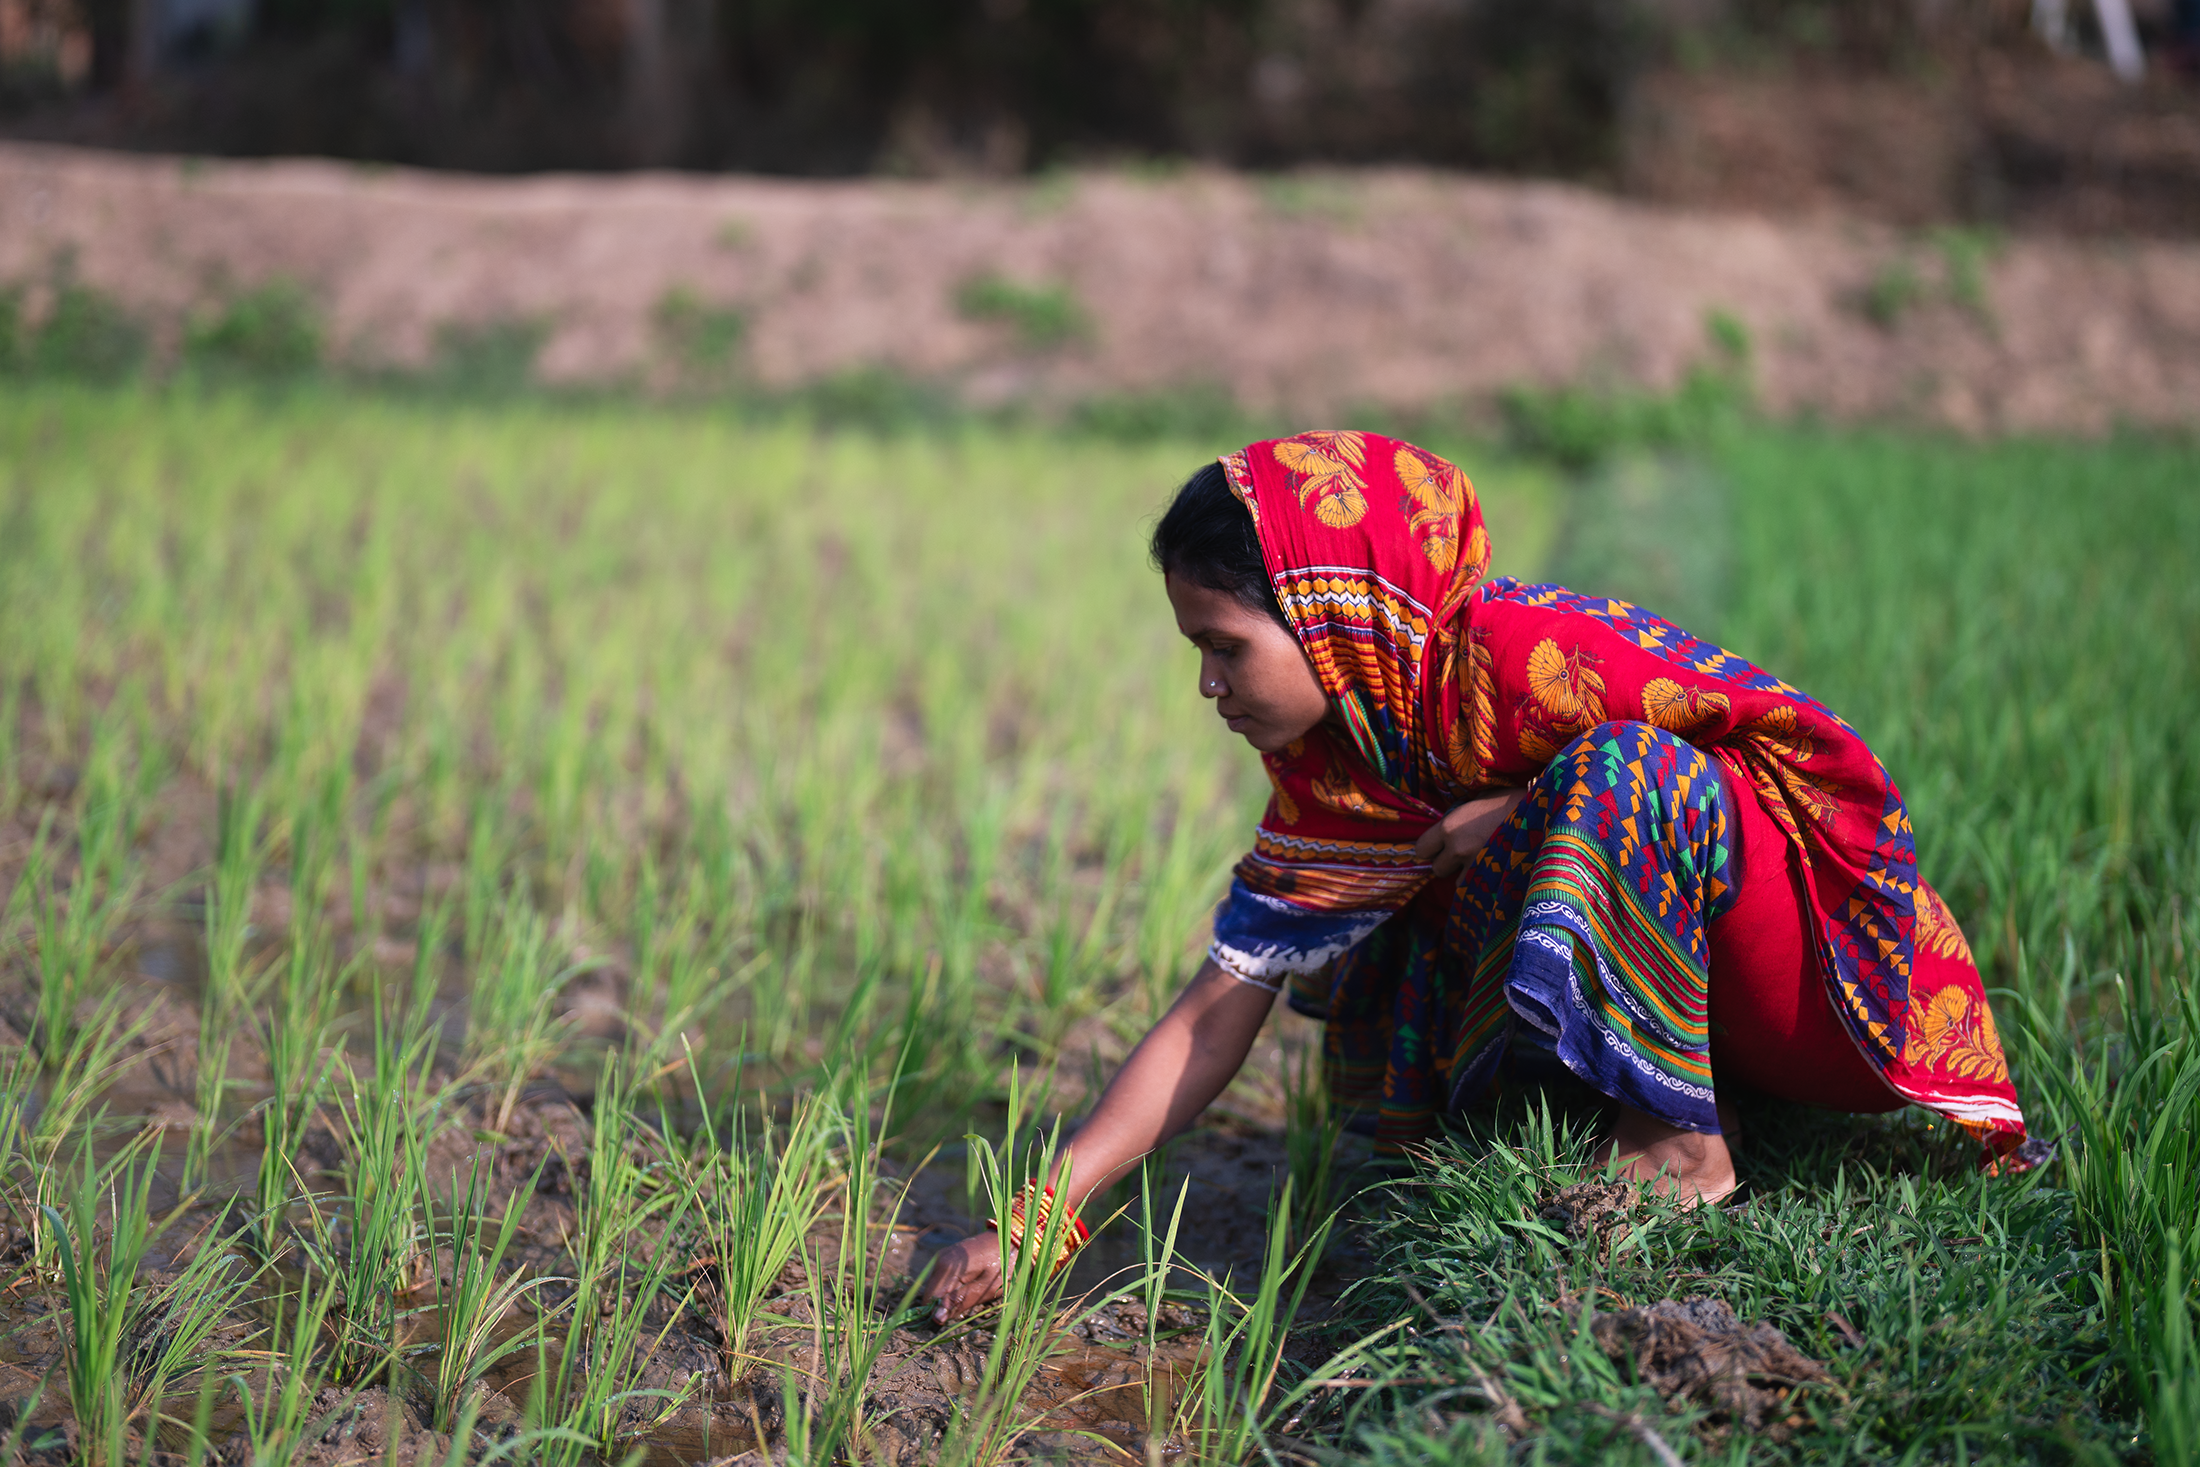 Manashi tends to her rice crops in Odisha, India